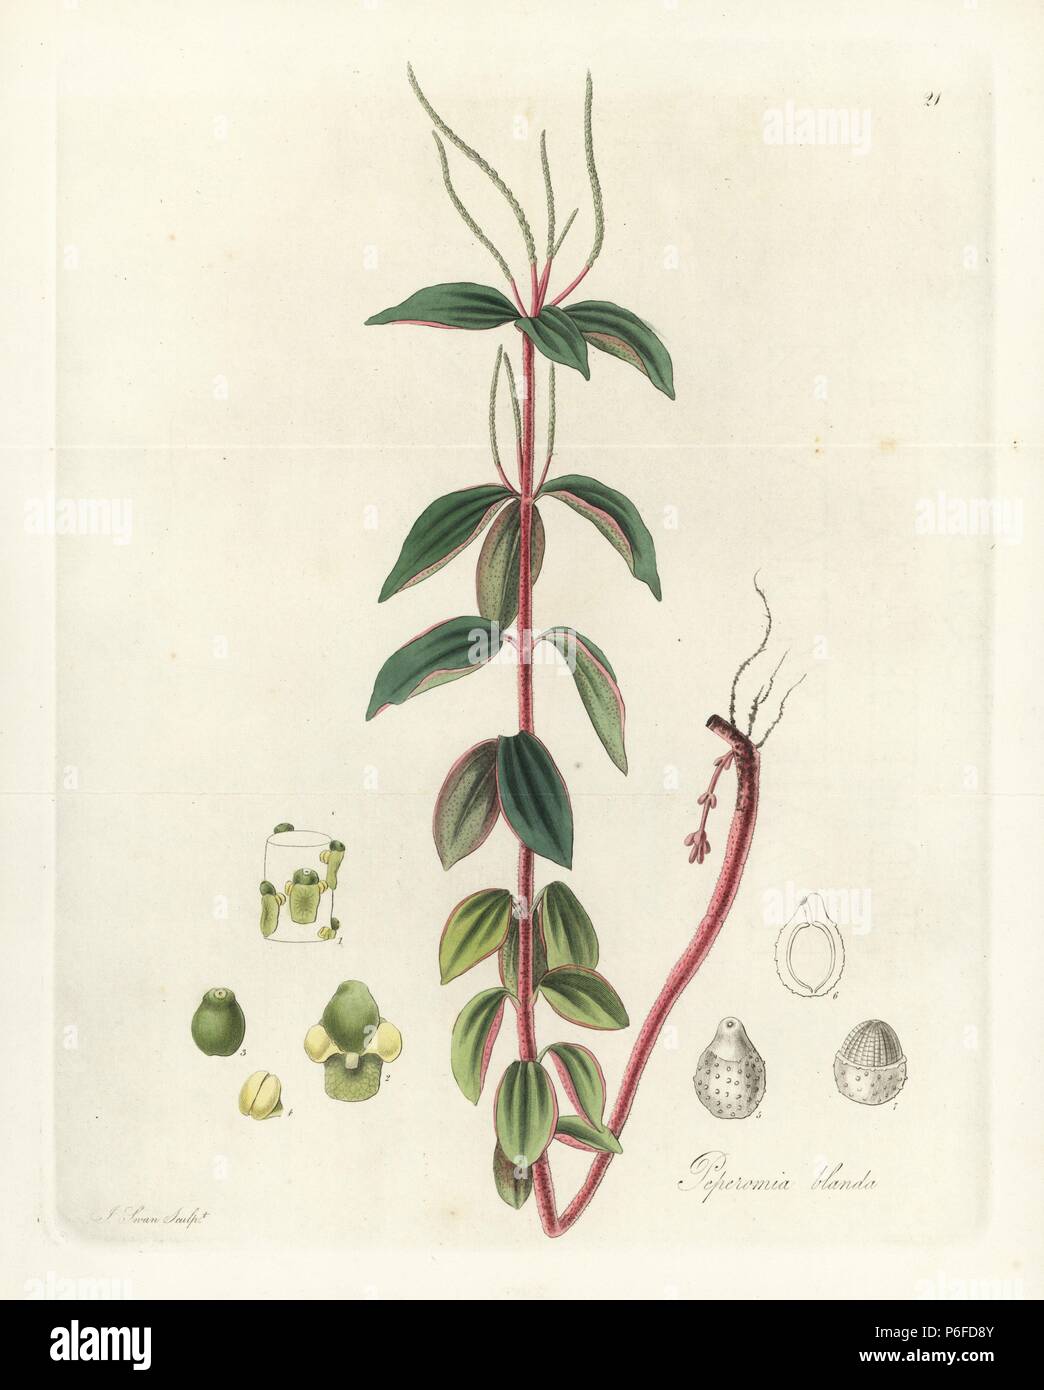 Villous peperomia or radiator plant, Peperomia blanda. Handcoloured copperplate engraving by J. Swan after a botanical illustration by William Jackson Hooker from his own "Exotic Flora," Blackwood, Edinburgh, 1823. Hooker (1785-1865) was an English botanist who specialized in orchids and ferns, and was director of the Royal Botanical Gardens at Kew from 1841. Stock Photo